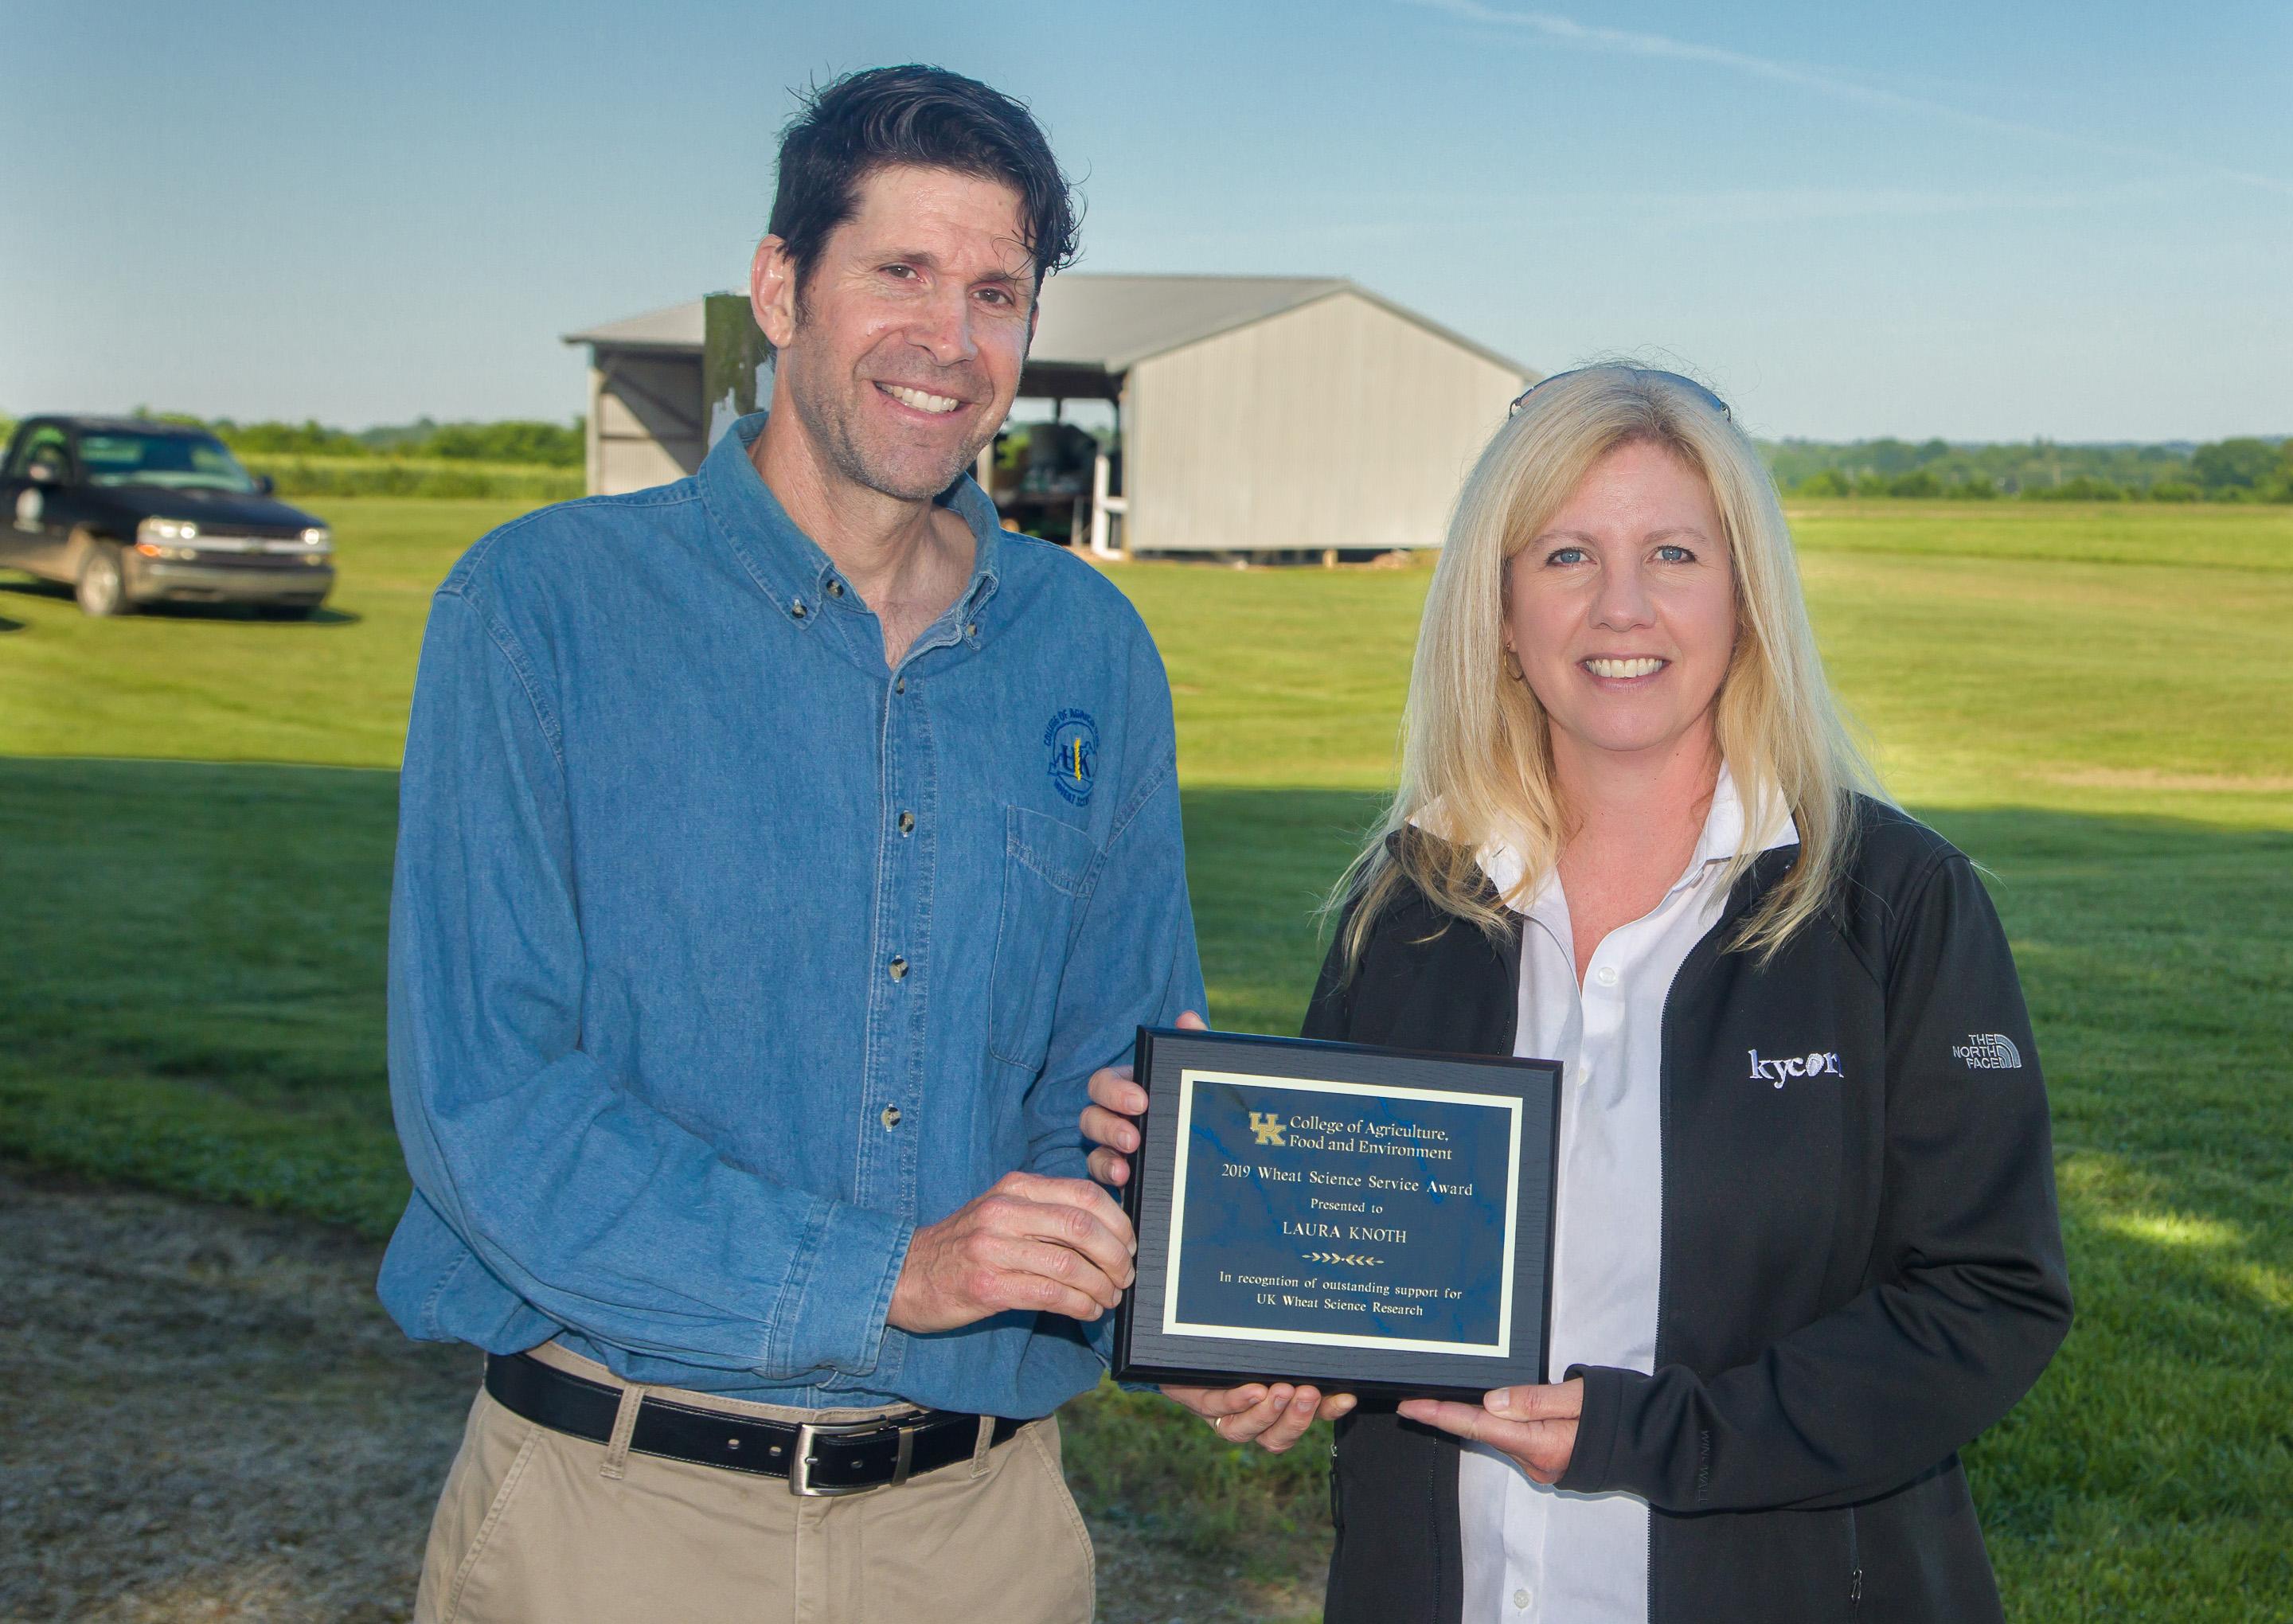 Bill Bruening of the UK Wheat Science Group presents Laura Knoth with the group's Service Award during the UK Wheat Field Day. Photo by Steve Patton, UK agricultural communications.